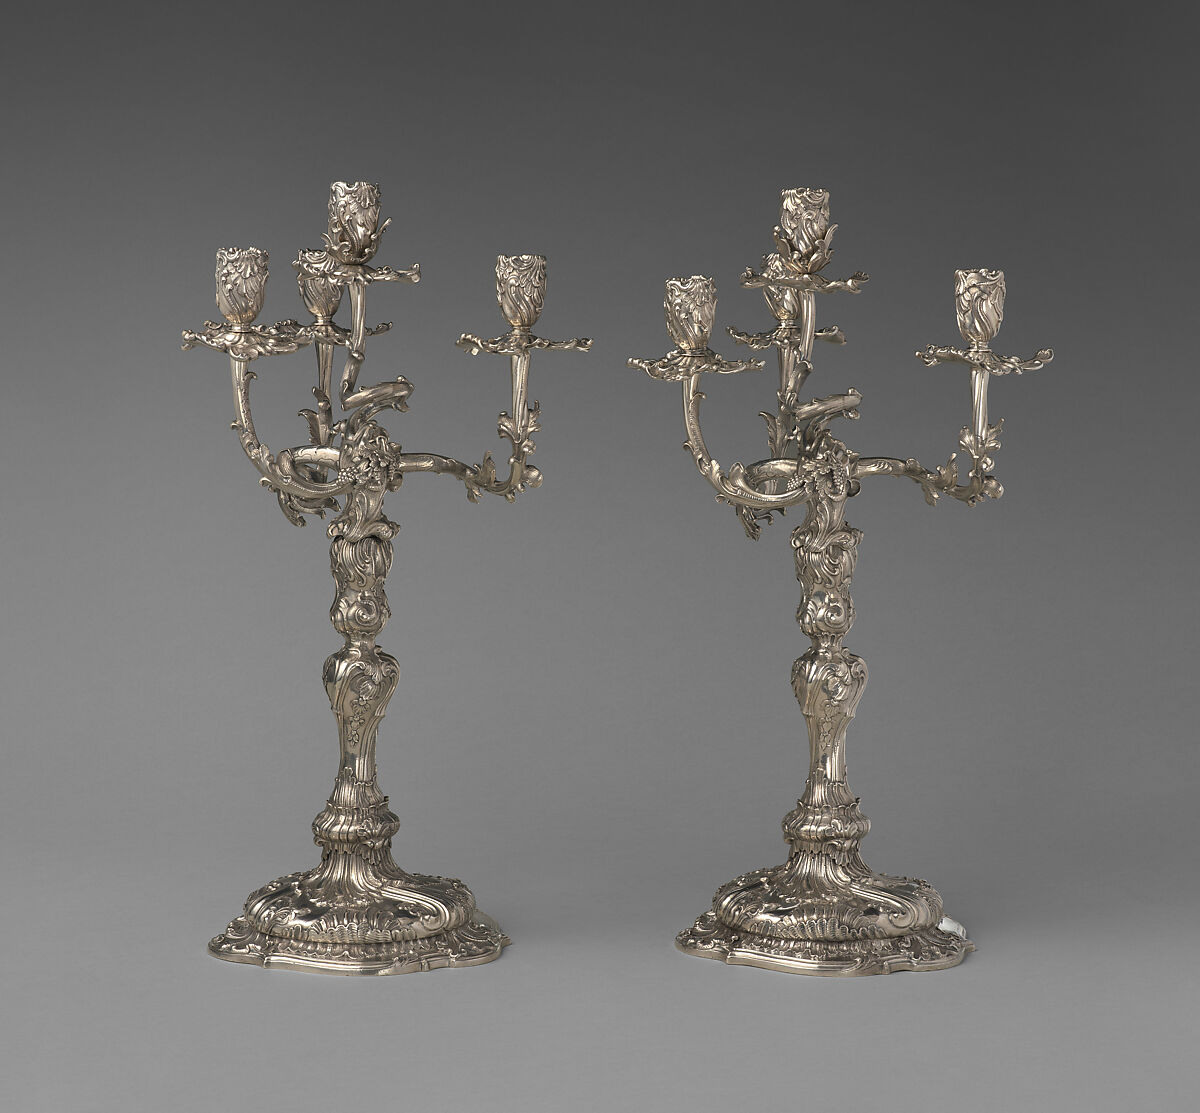 Pair of royal German silver four-light candelabra, Christian Heinrich Ingermann (German, 1713–1778), Cast, chased and engraved silver, German, Dresden 